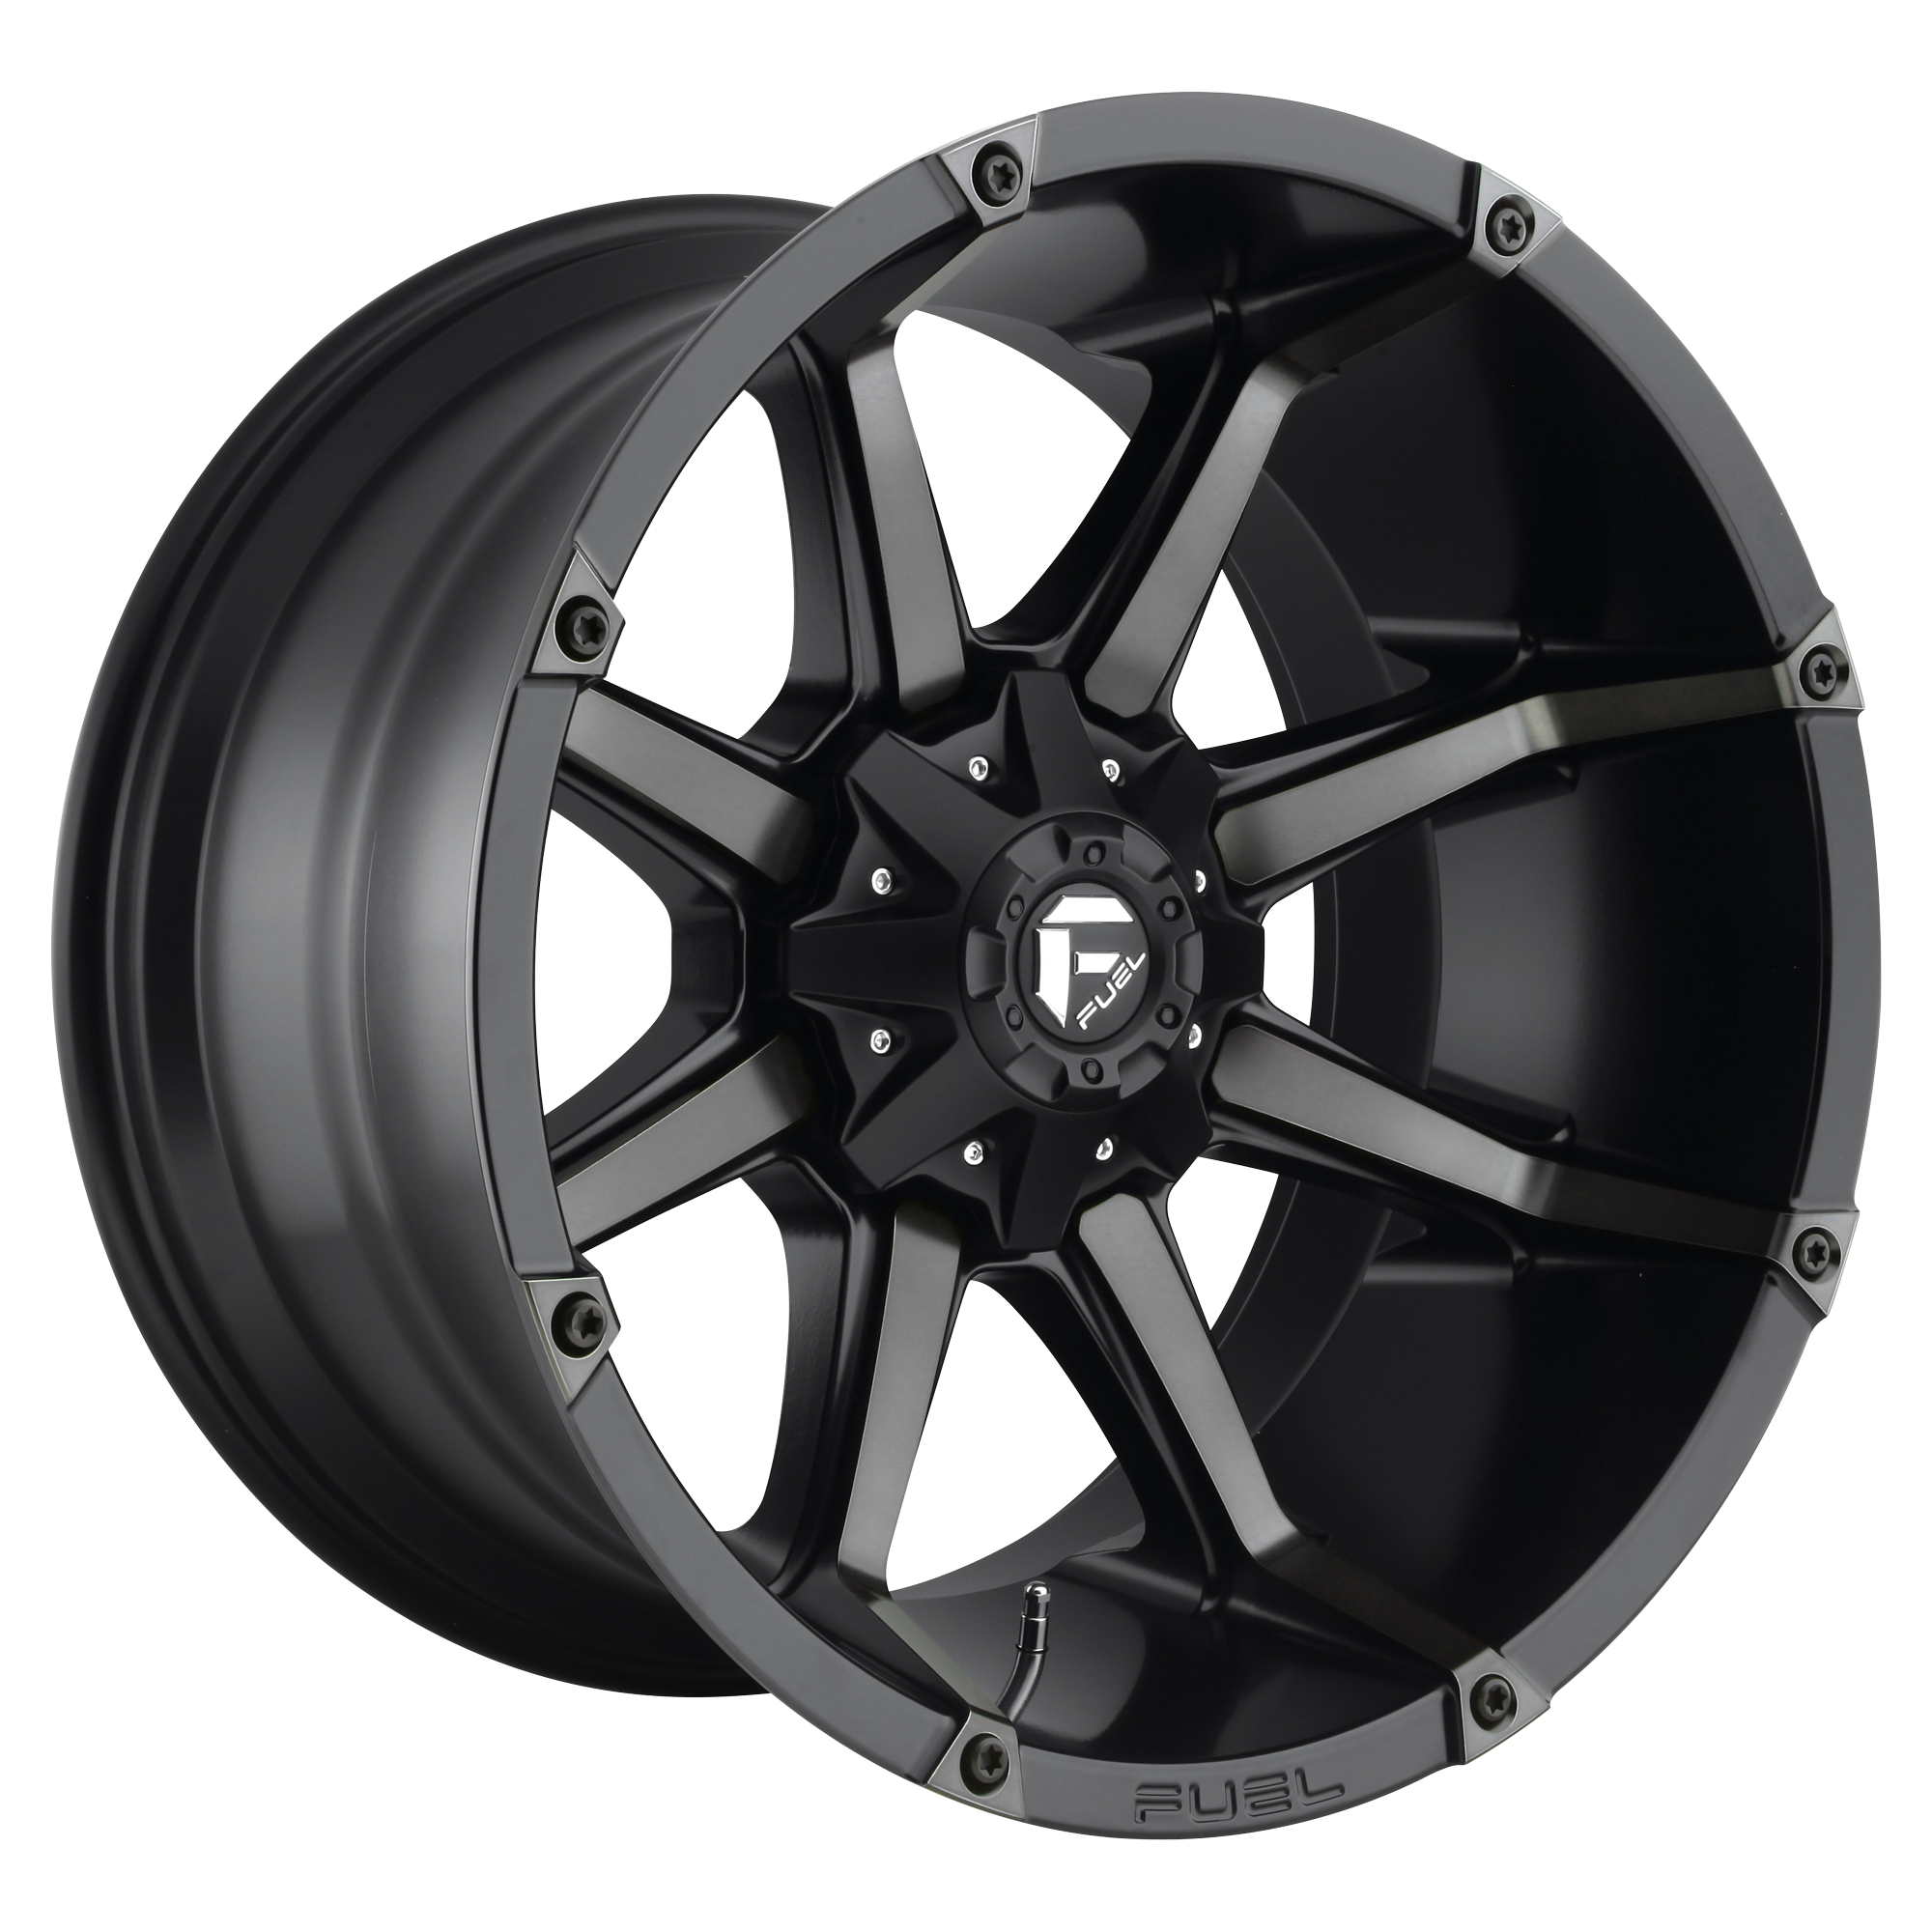 COUPLER 17x9 5x127.00/5x139.70 MATTE BLACK DOUBLE DARK TINT (-12 mm) - Tires and Engine Performance